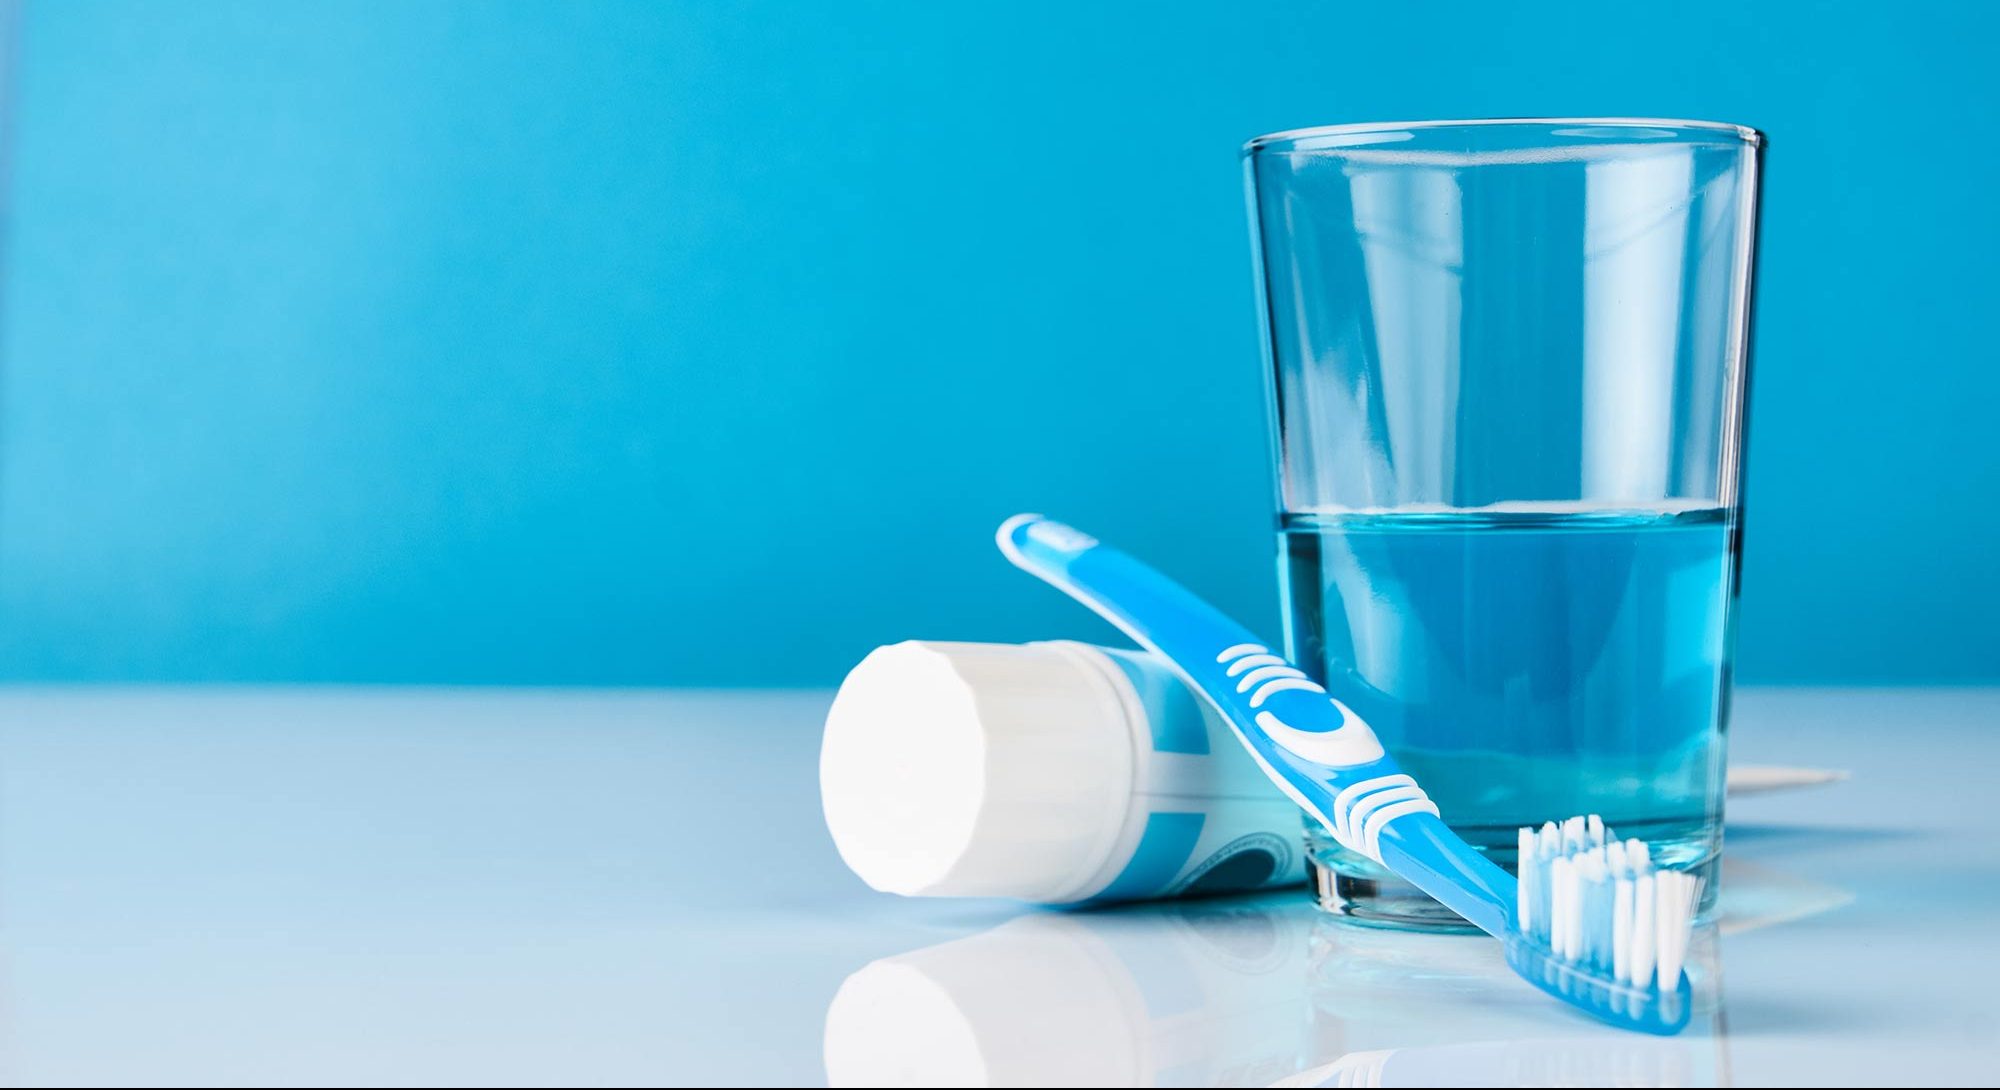 A new report suggests mouthwash has the potential to fight COVID-19 and reduce transmission, prompting calls for further research